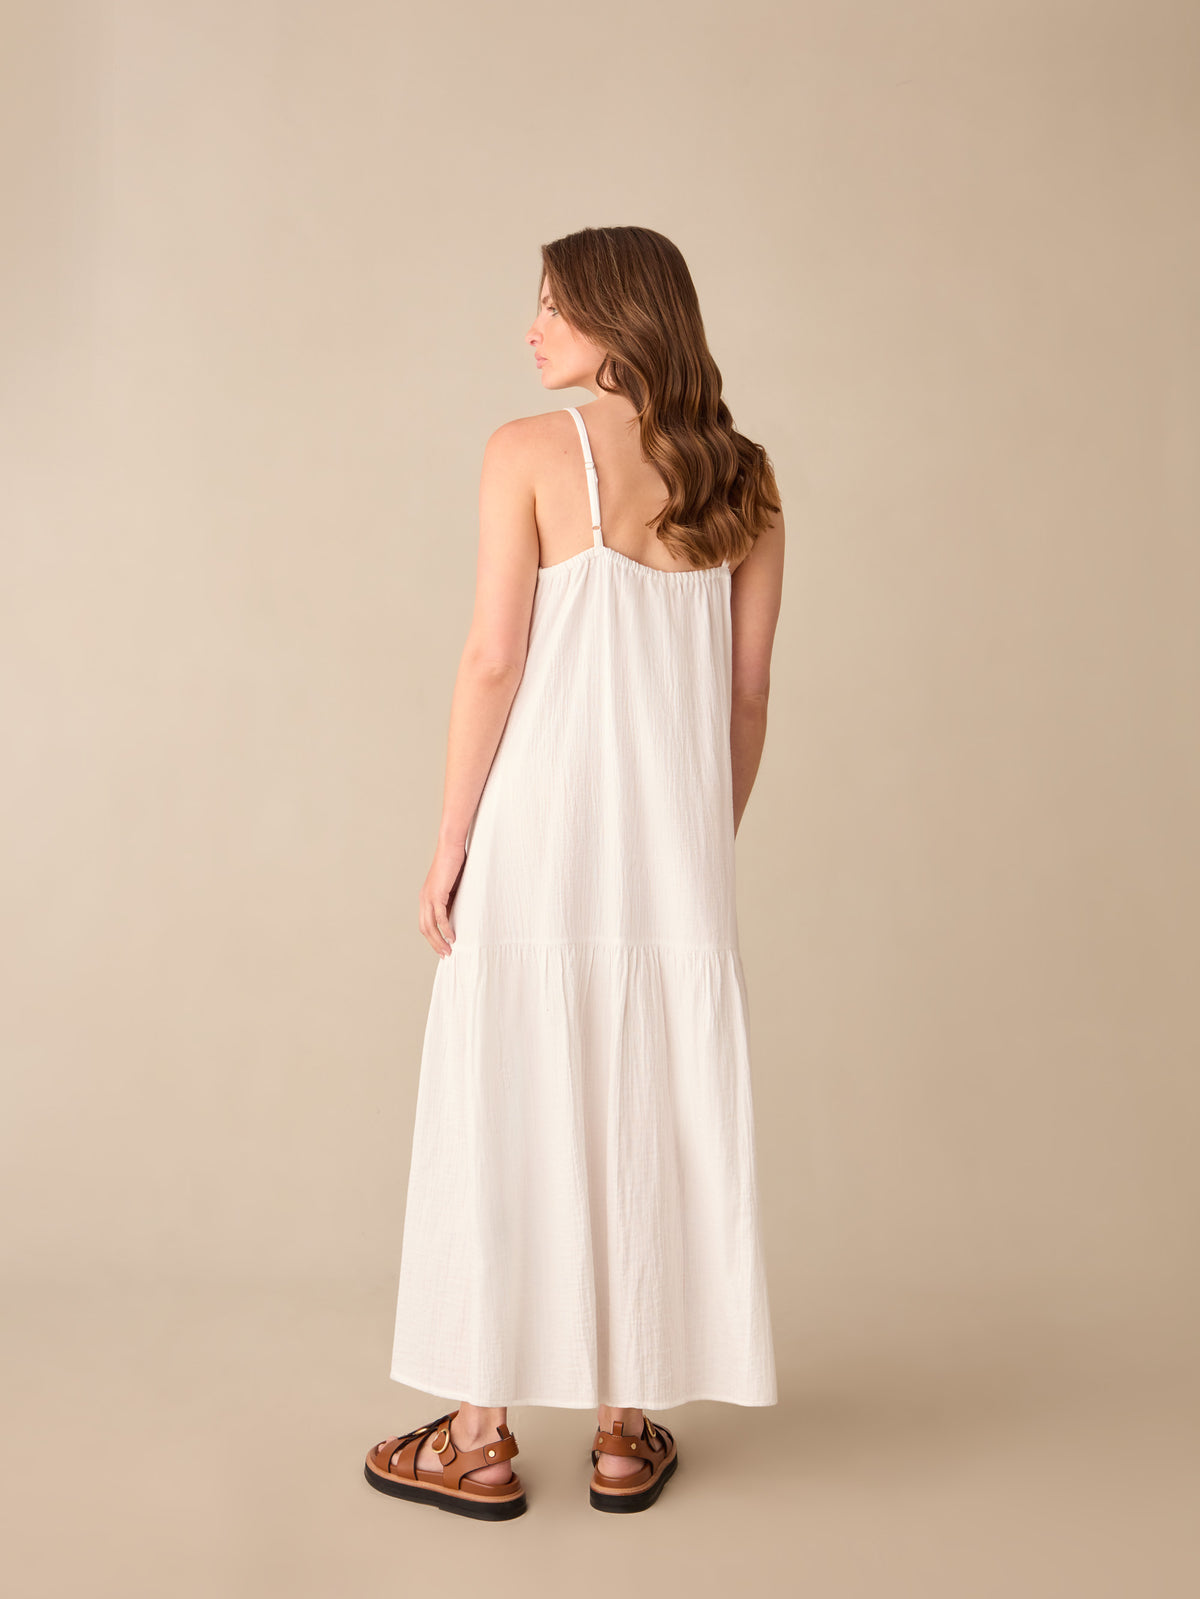 Petite White Tiered Hem Strappy Cheesecloth Dress